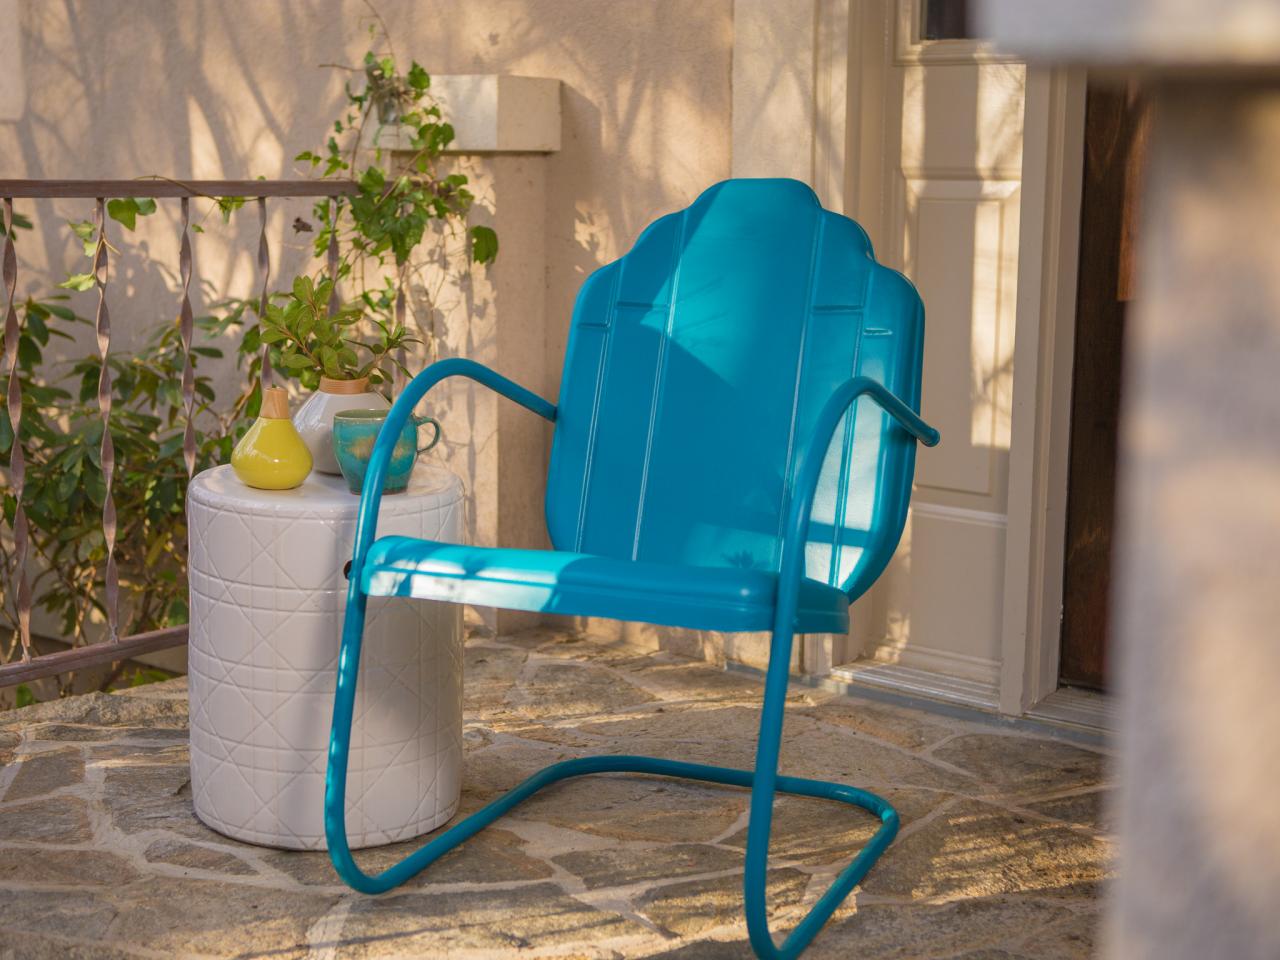 How To Paint An Outdoor Metal Chair, Diy Paint Cast Aluminum Patio Furniture